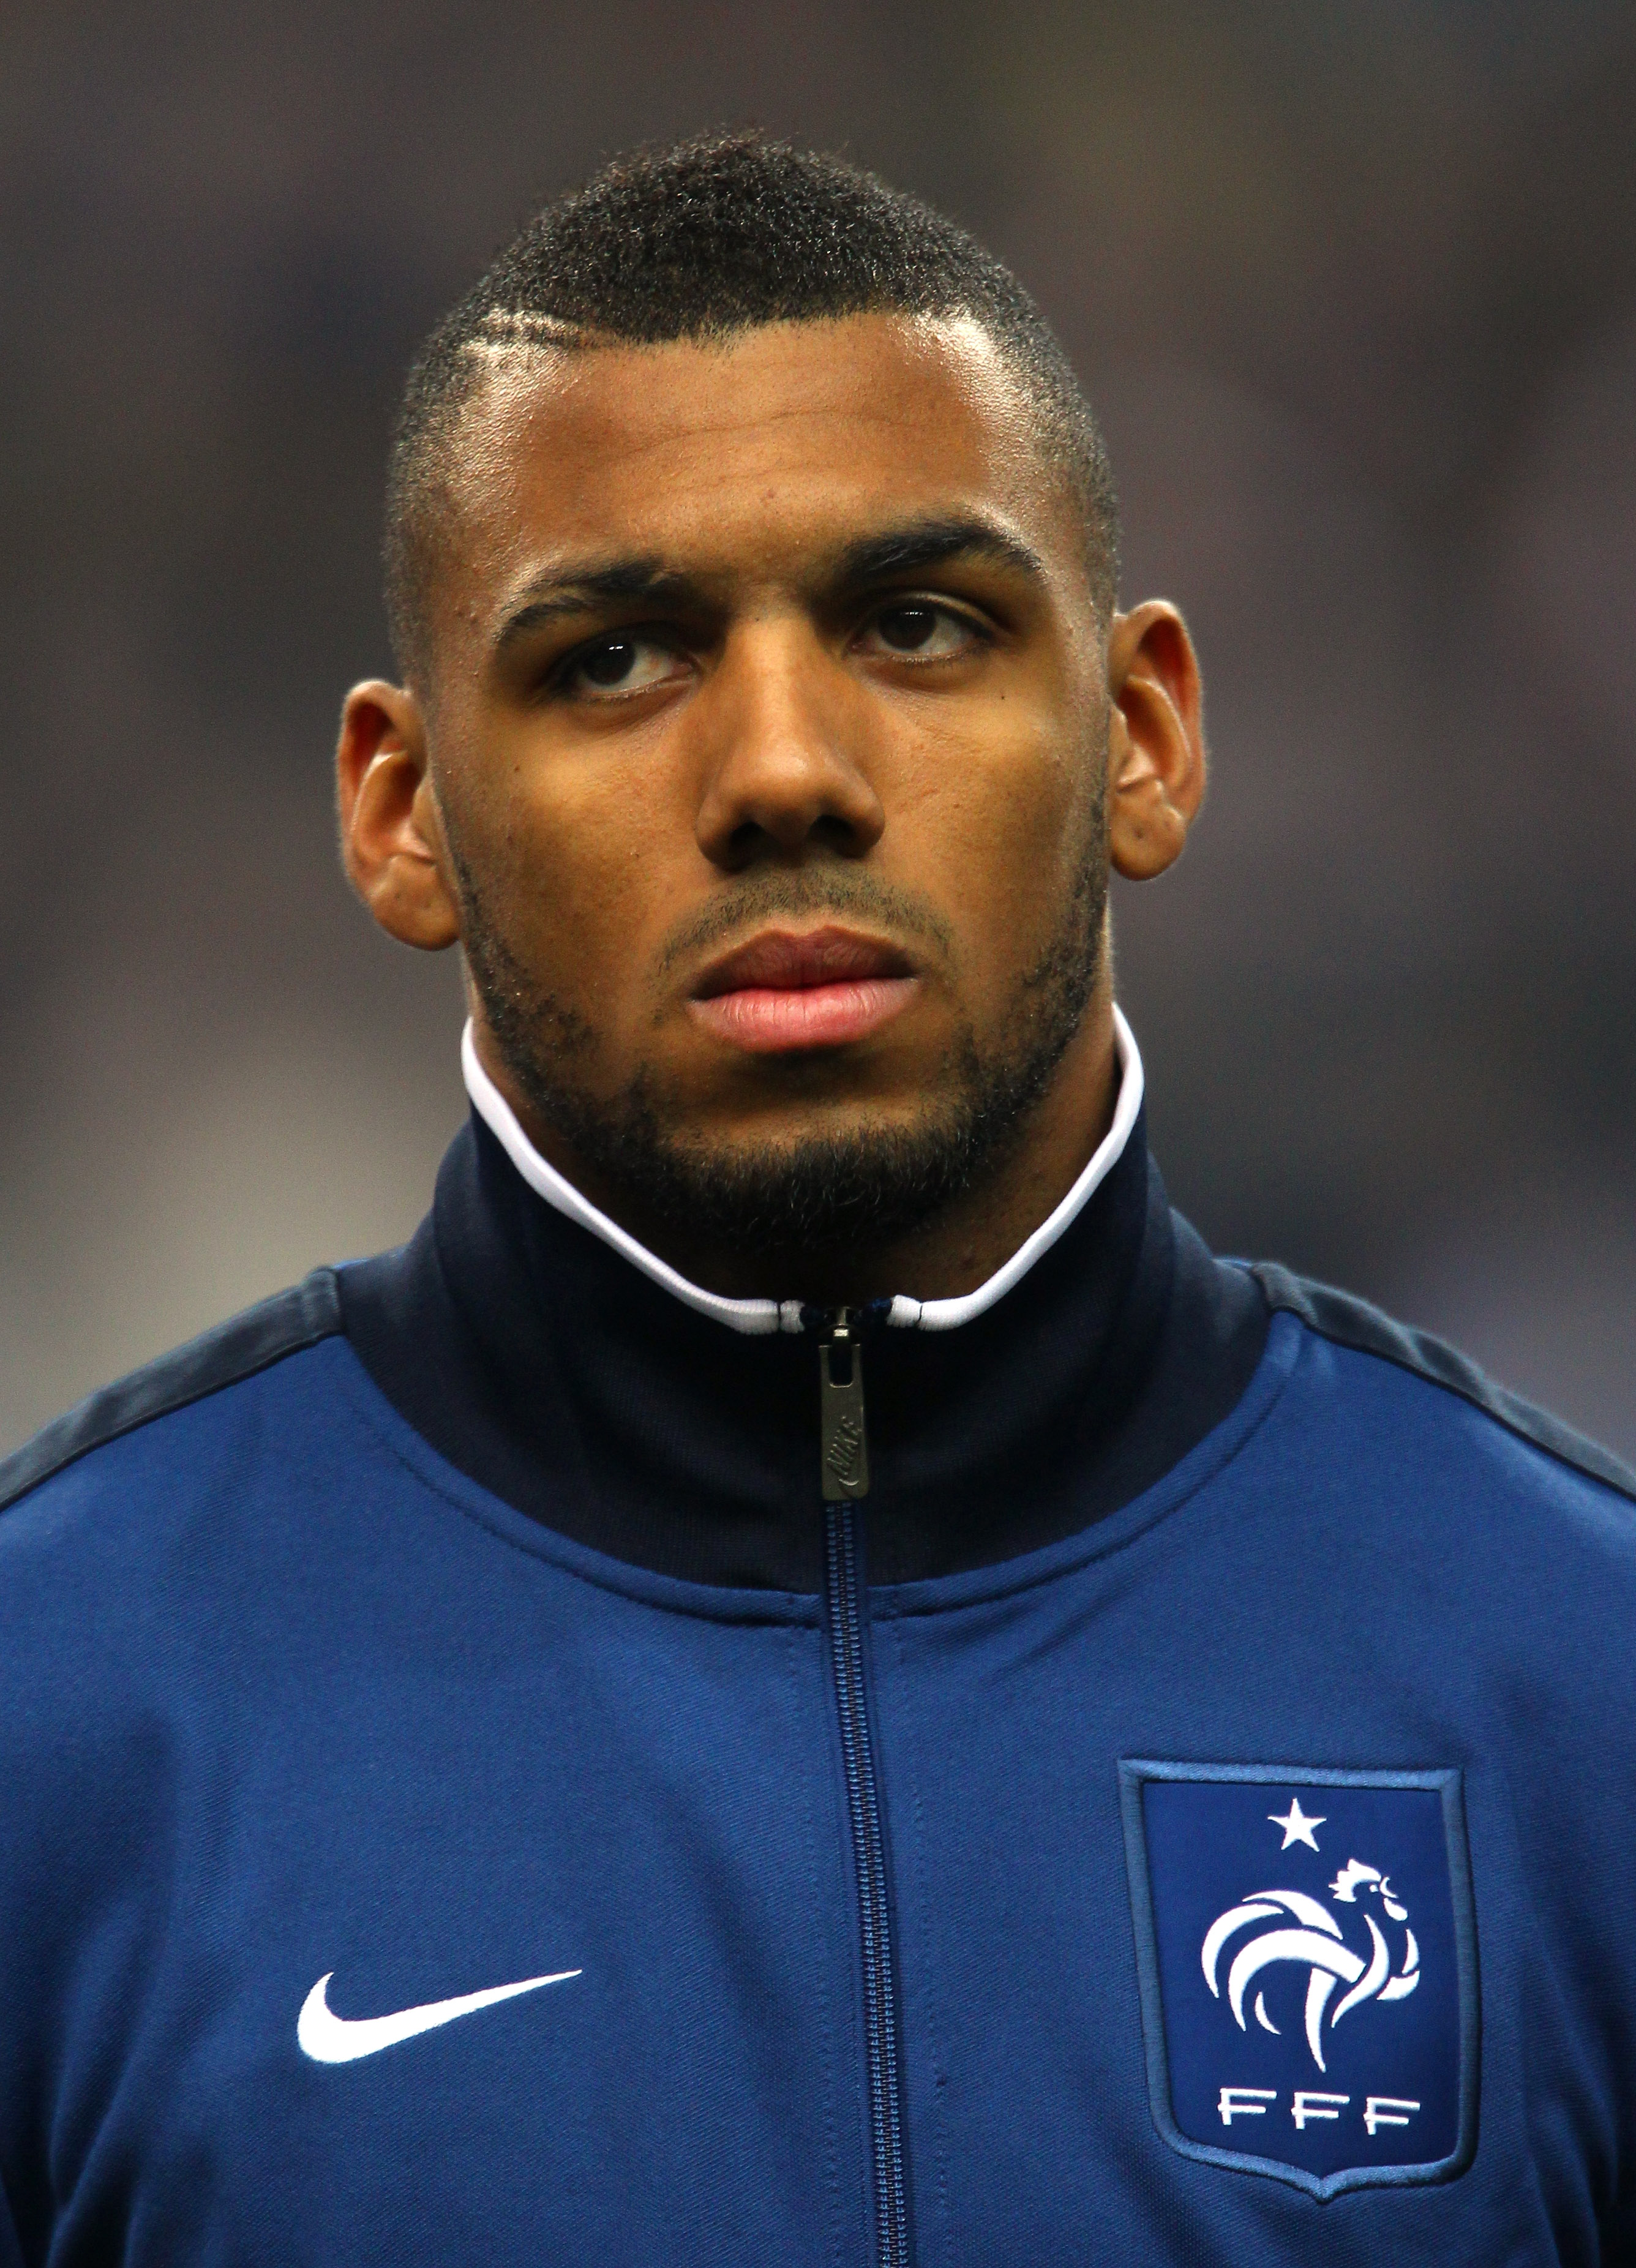 PARIS, FRANCE - FEBRUARY 09:  Yann M'Vila of France lines up prior to the International friendly match between France and Brazil at Stade de France on February 9, 2011 in Paris, France.  (Photo by Alex Livesey/Getty Images)